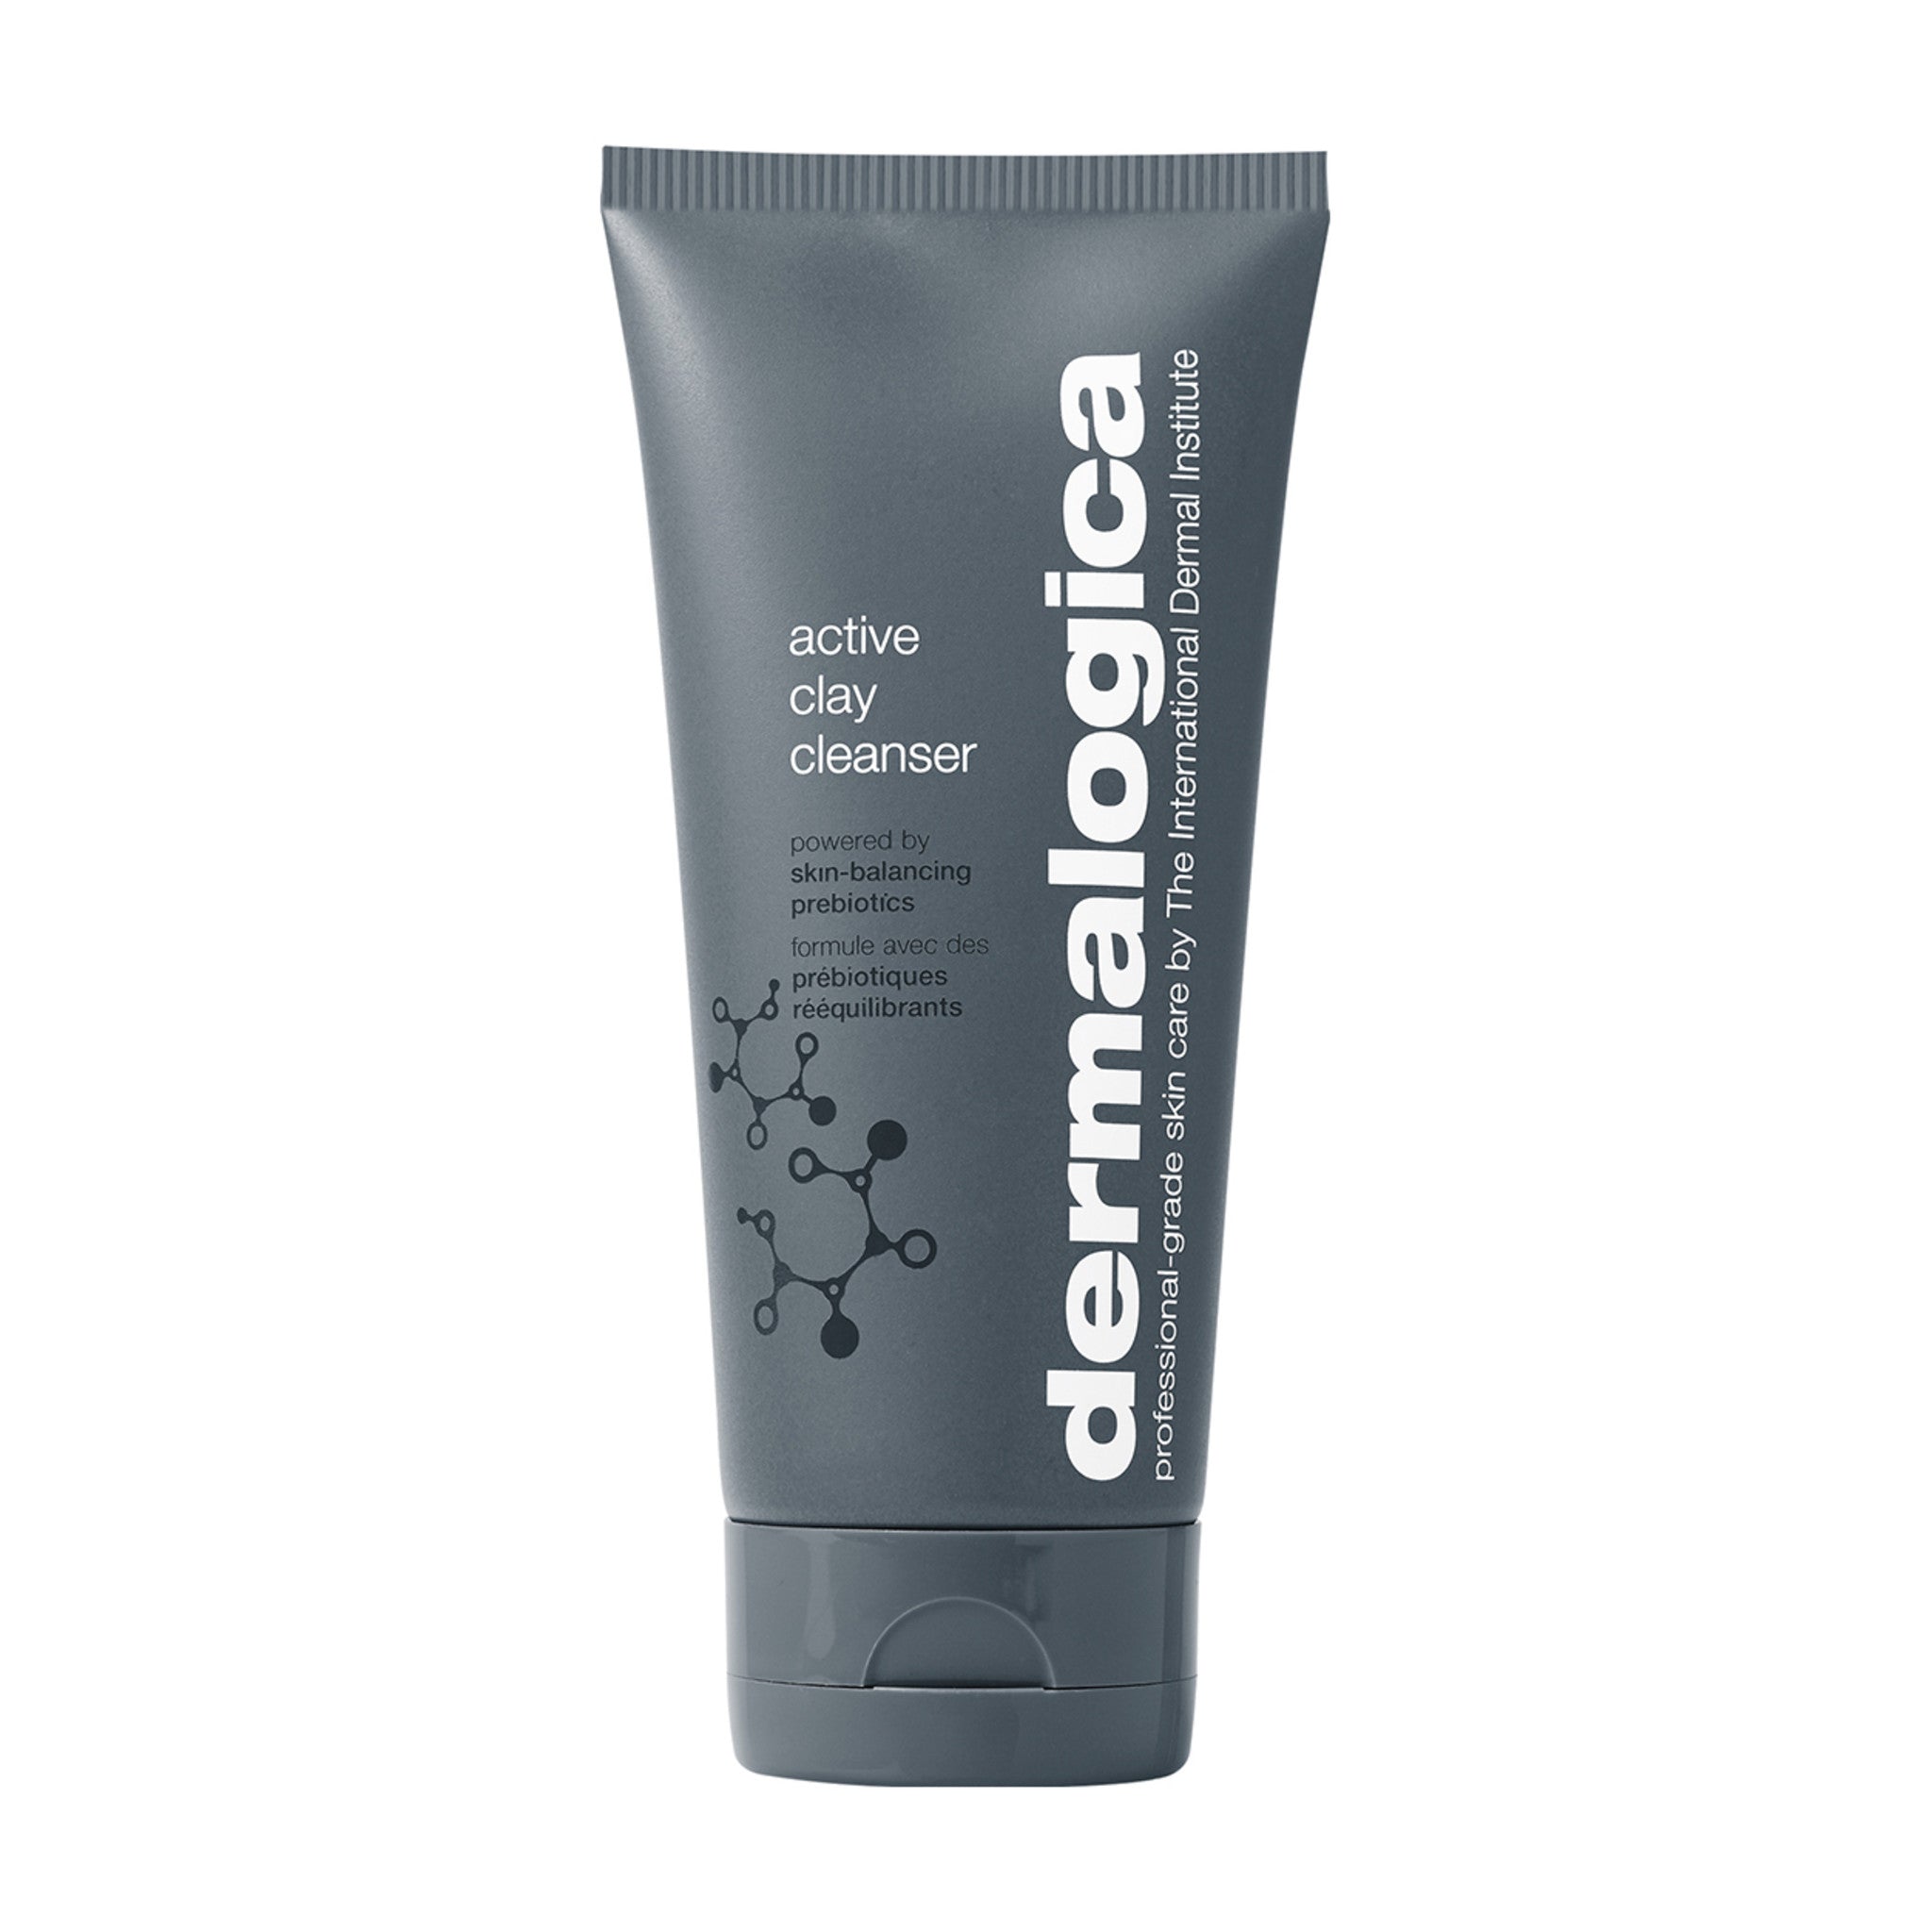 Dermalogica Active Clay Cleanser main image.